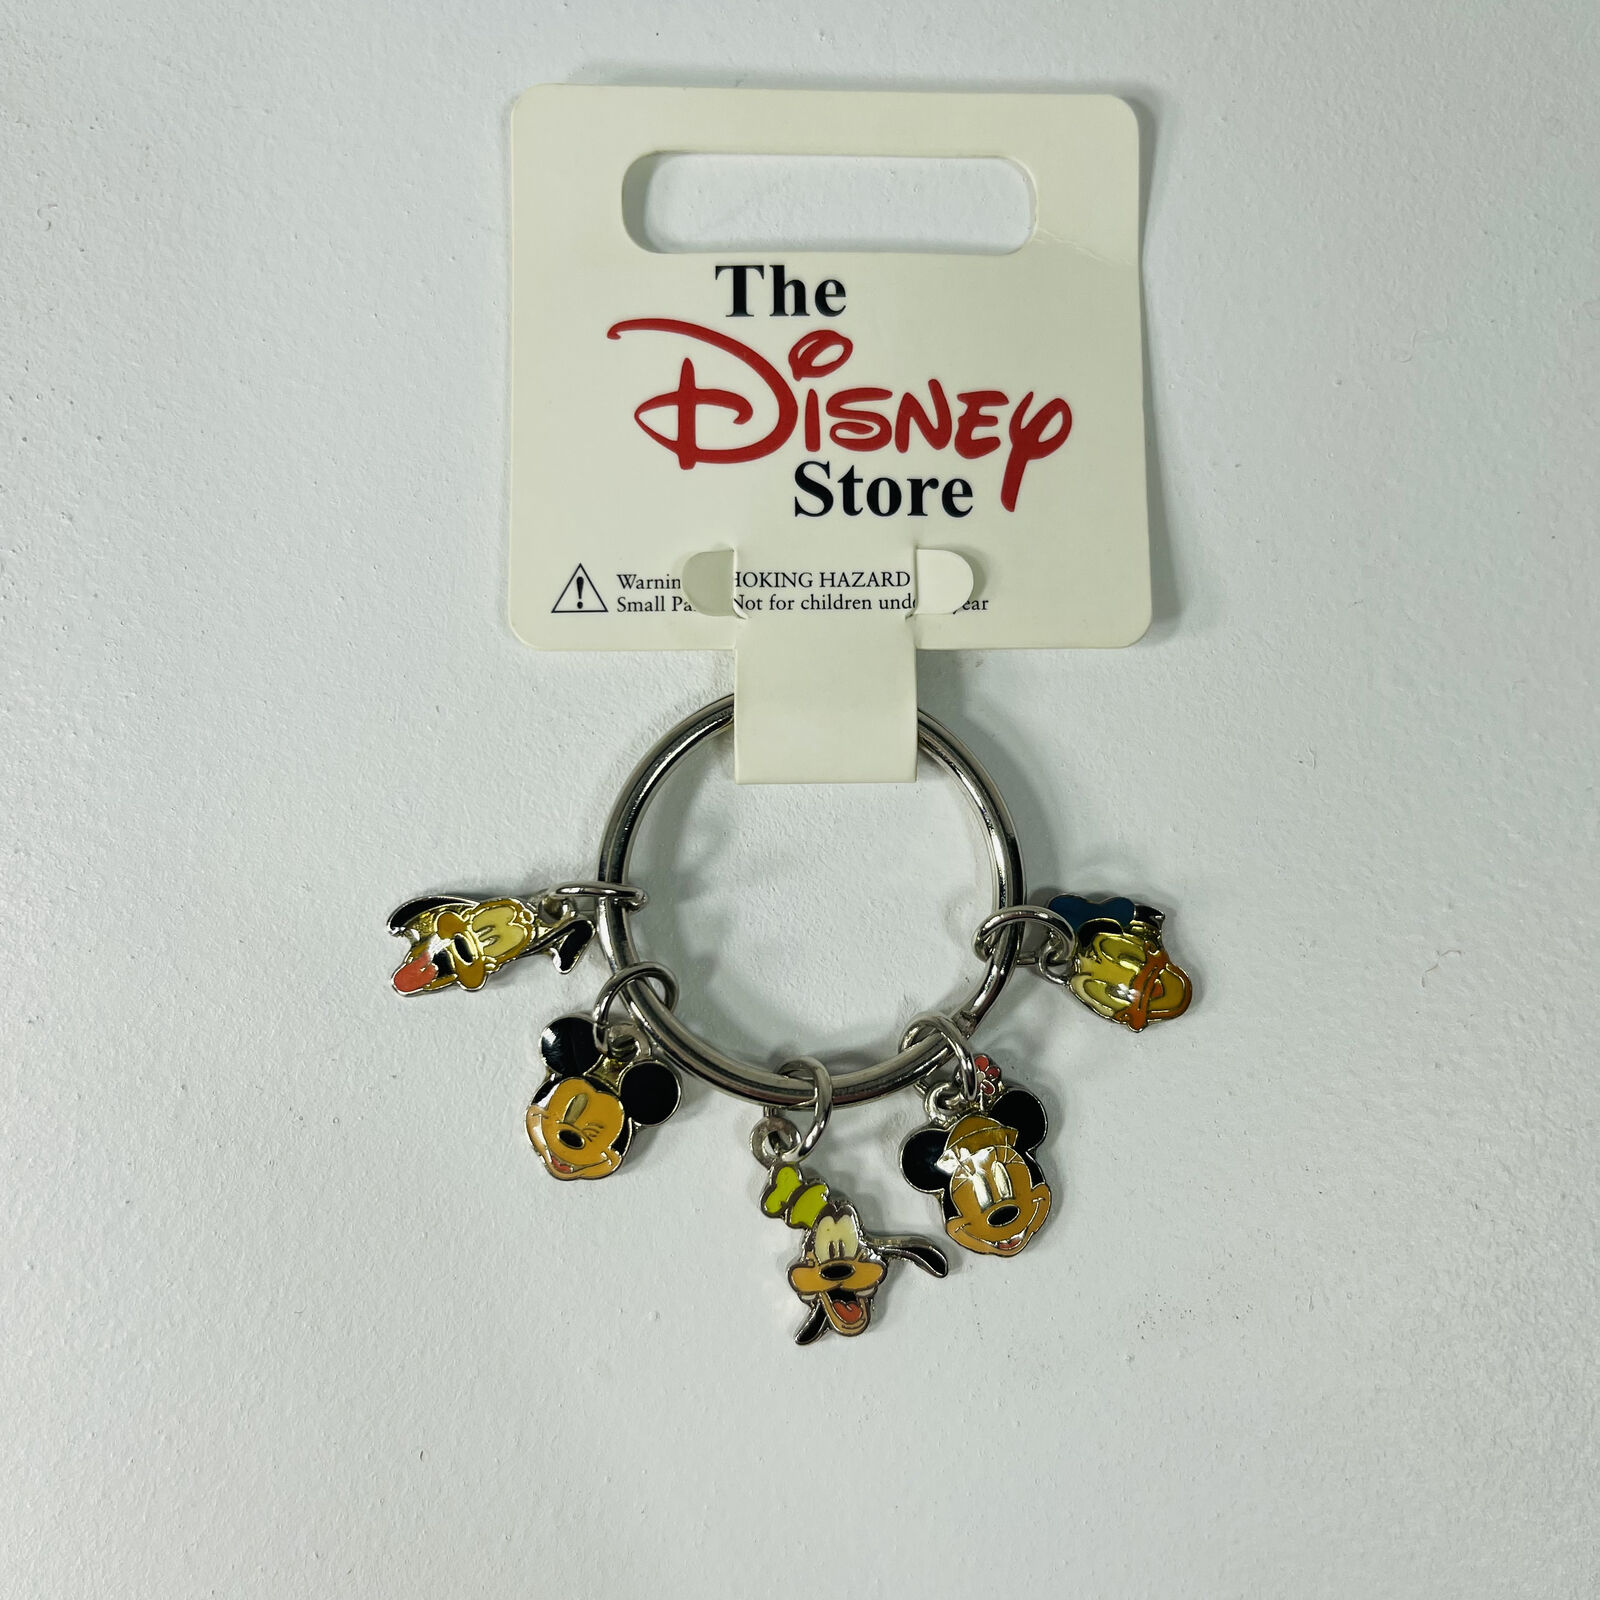 VTG Disney Charms Keychain Mickey Mouse Minnie Mouse Pluto Goofy Donald Duck